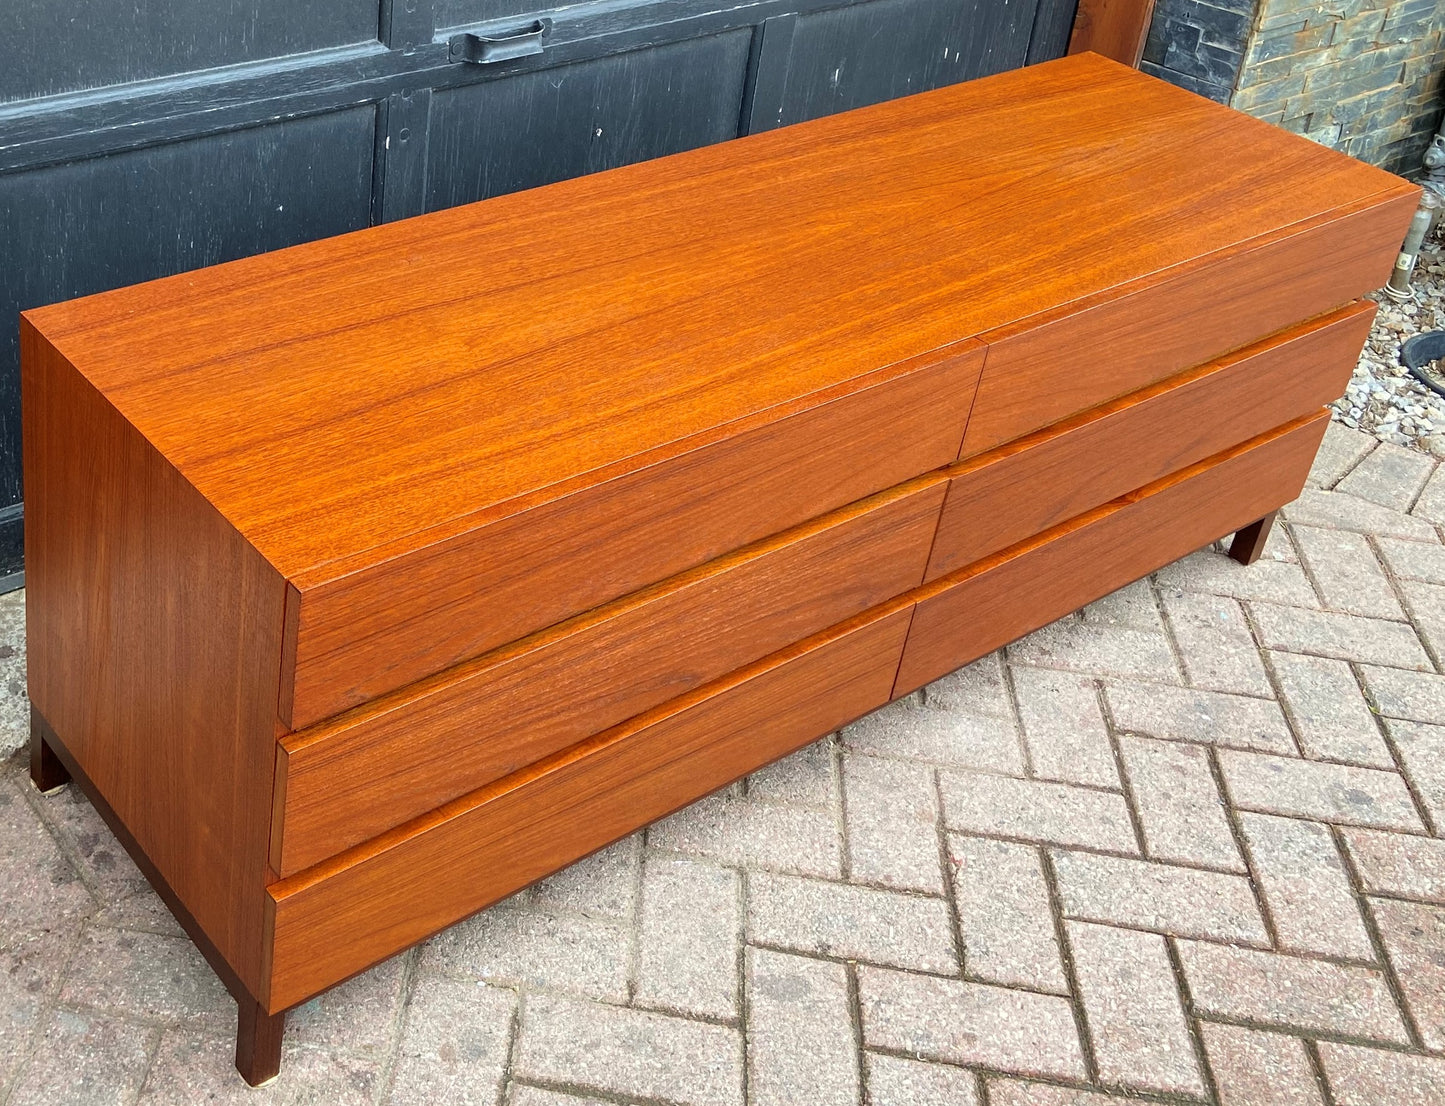 REFINISHED MCM Teak w Rosewood Low Dresser/ TV Console by Reff/ Knoll, 63" PERFECT